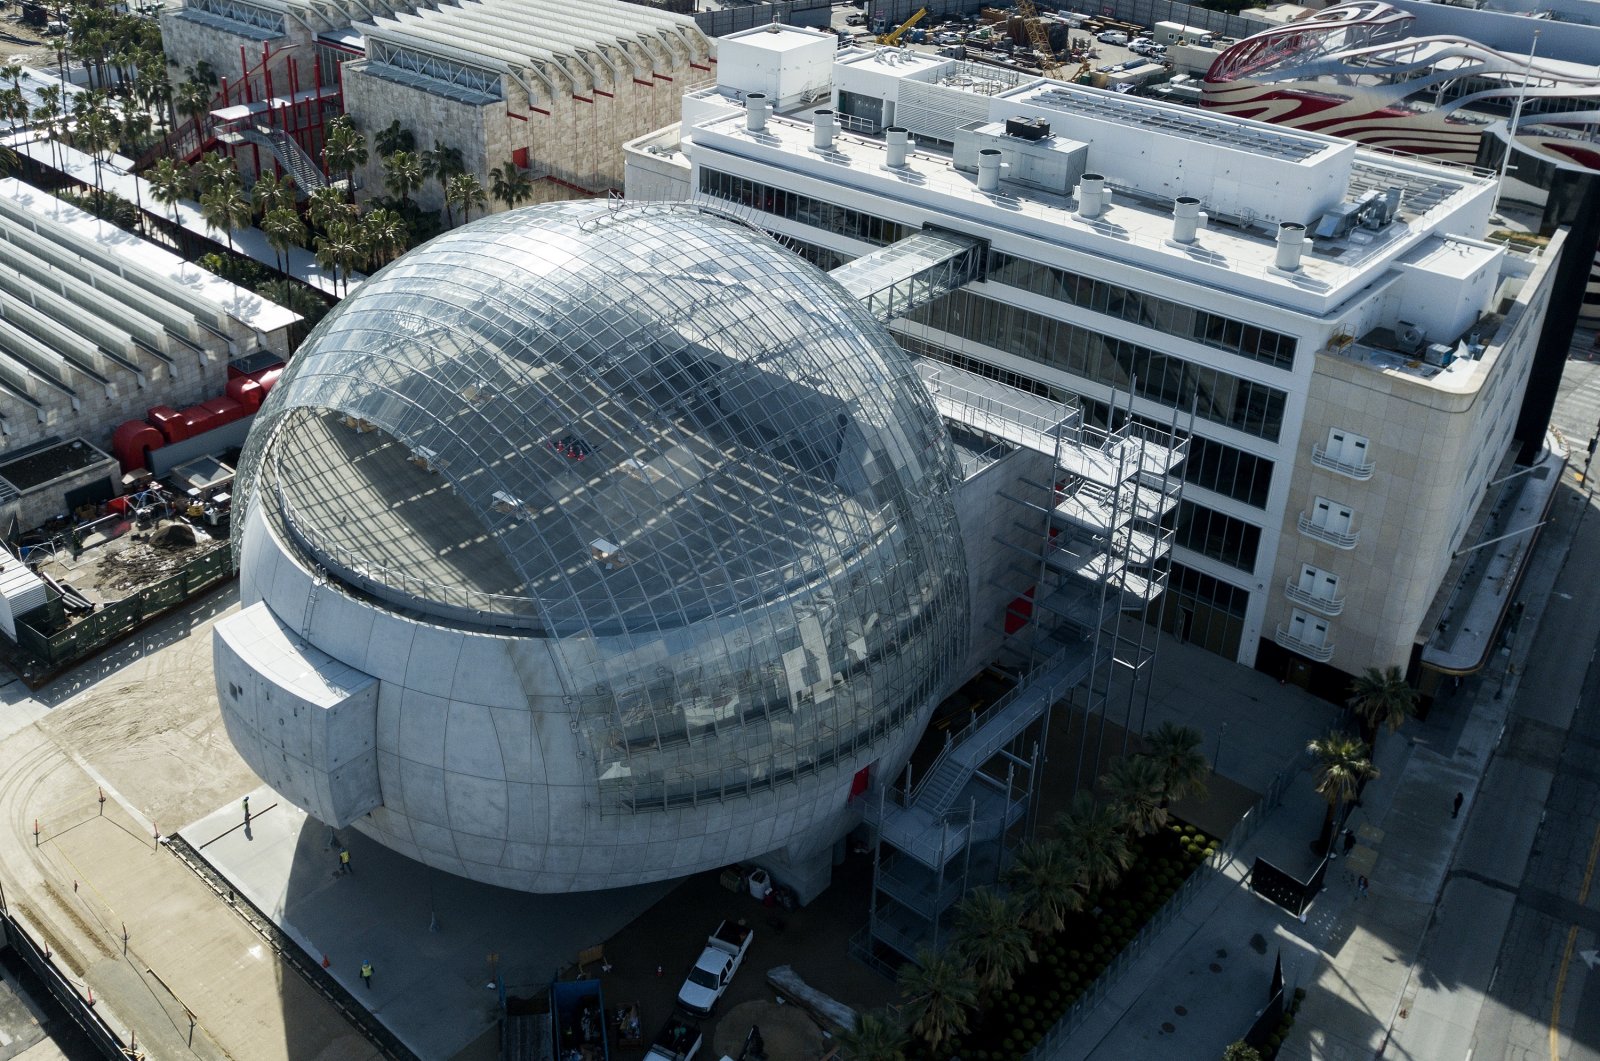 The Academy Museum of Motion Pictures, with its iconic attached spherical theater, has added an unmistakable silhouette to the landscape of Los Angeles. (DPA Photo)